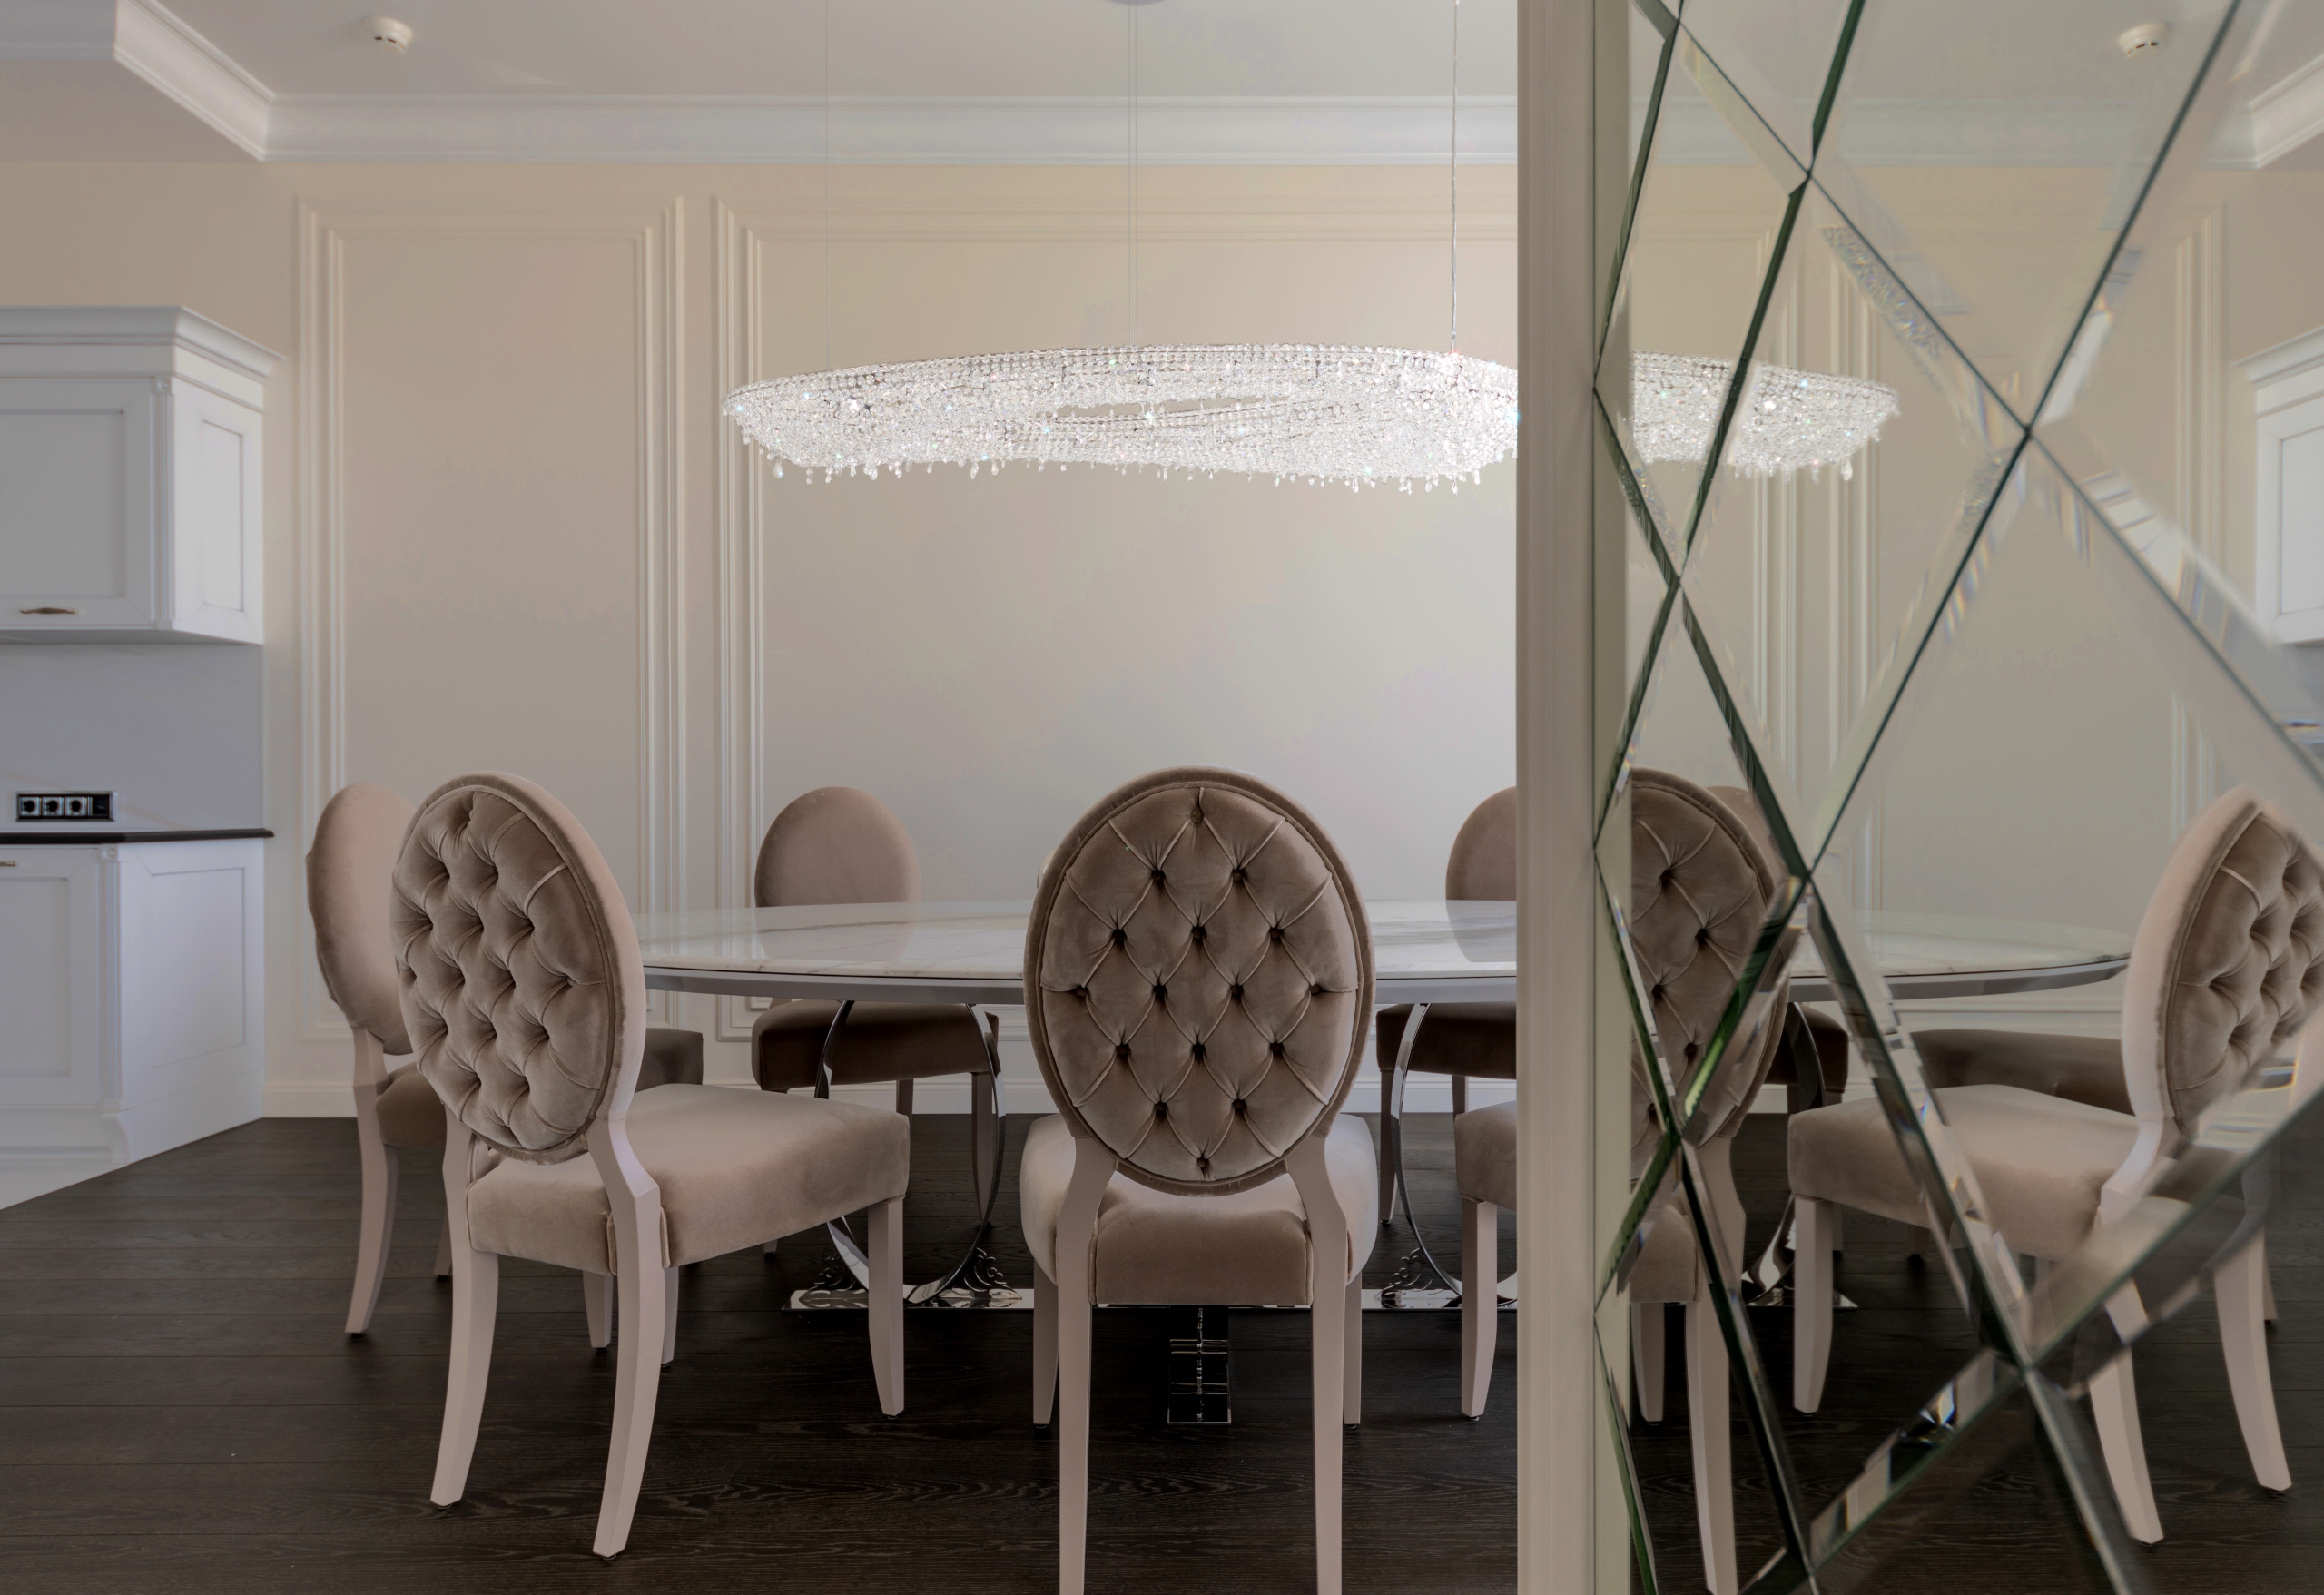 Artica chandelier above a dining table 